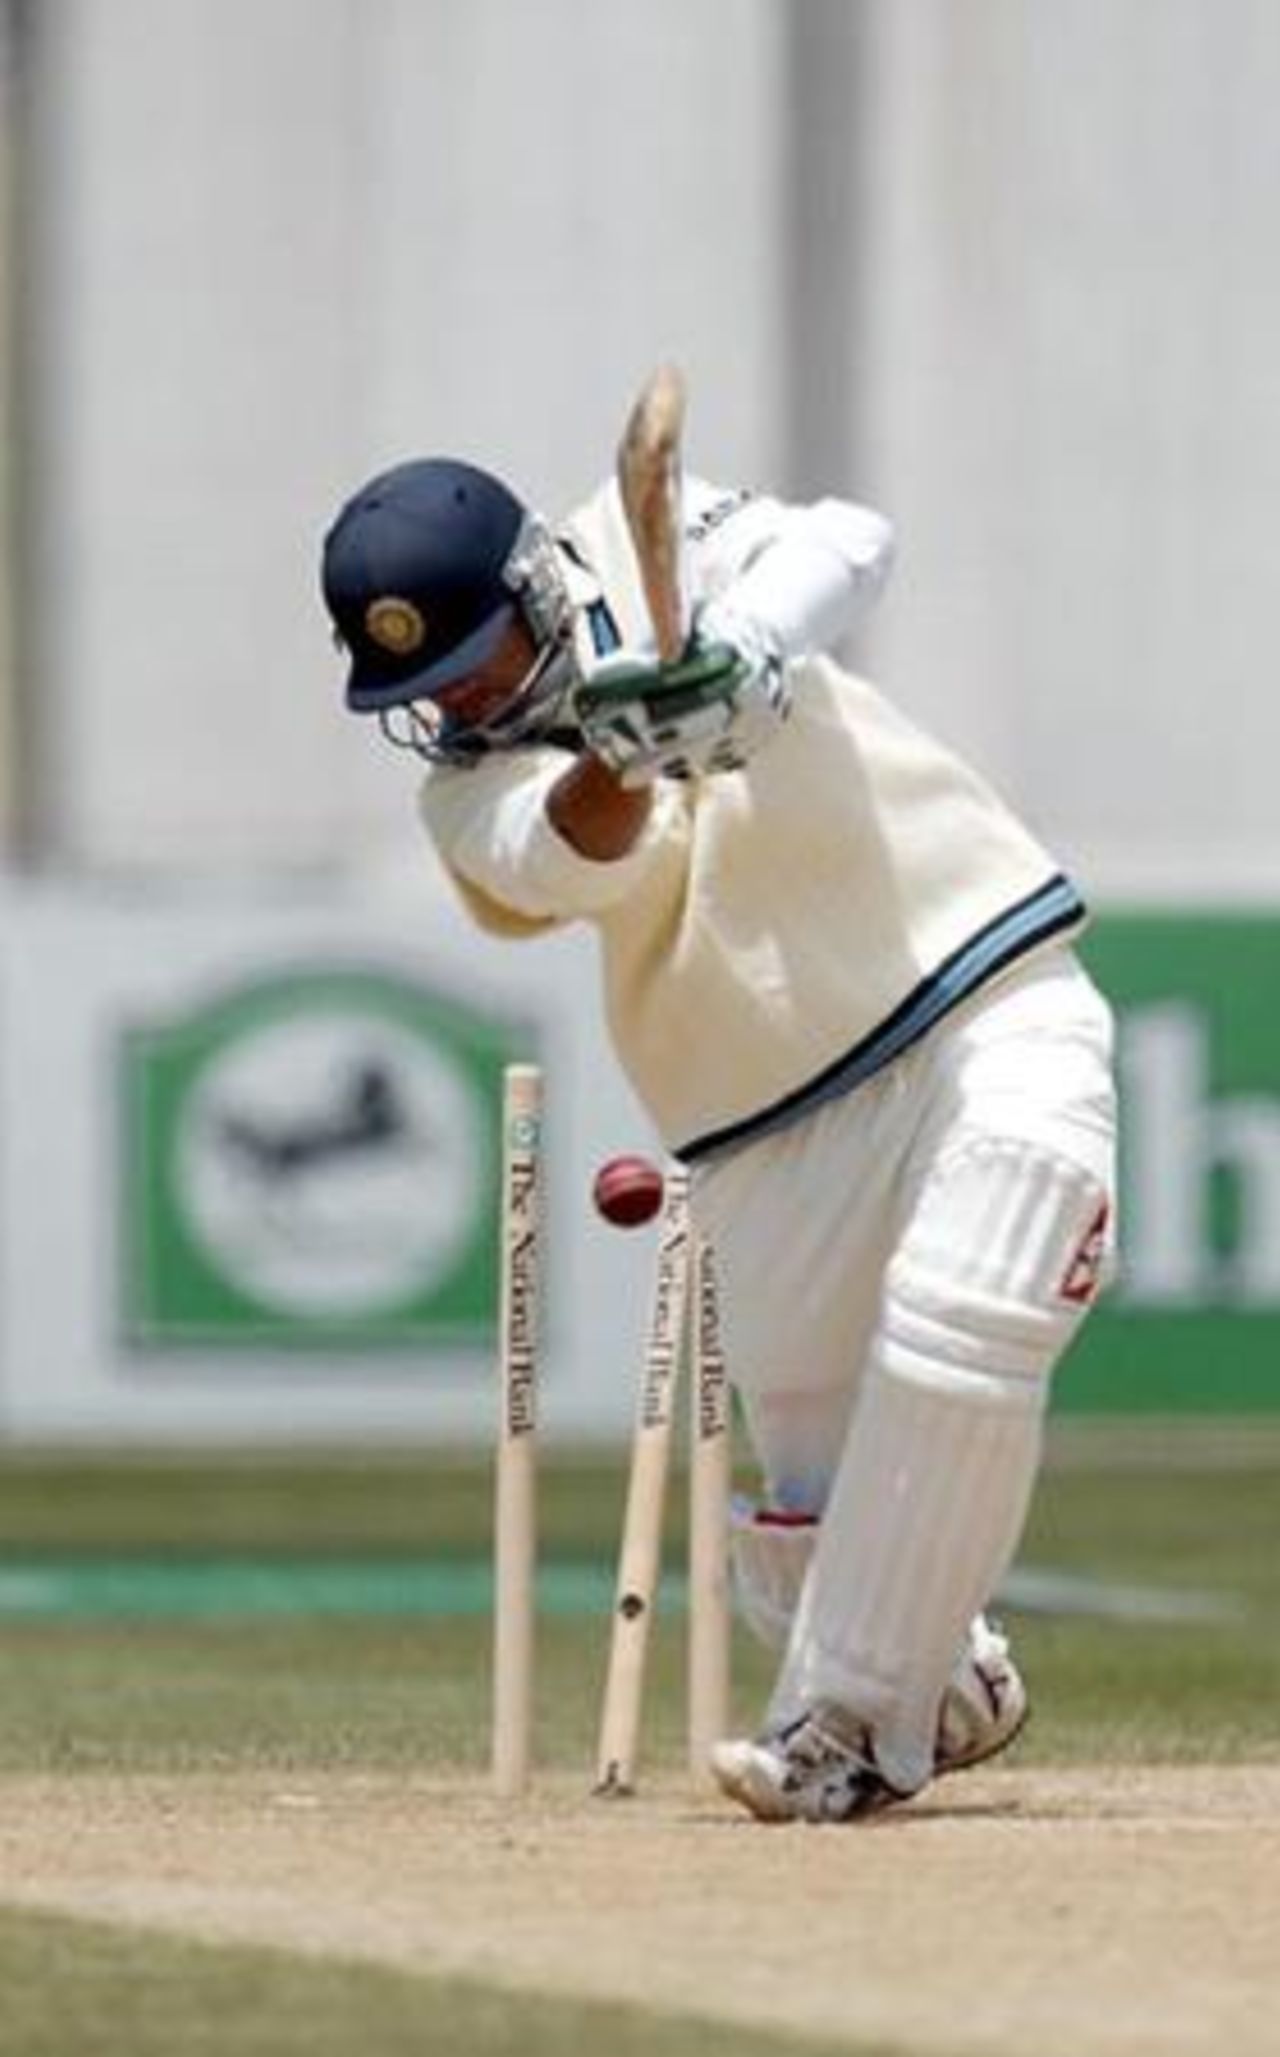 Indian batsman Rahul Dravid is bowled by New Zealand bowler Shane Bond for seven in his second innings. 1st Test: New Zealand v India at Basin Reserve, Wellington, 12-16 December 2002 (14 December 2002).